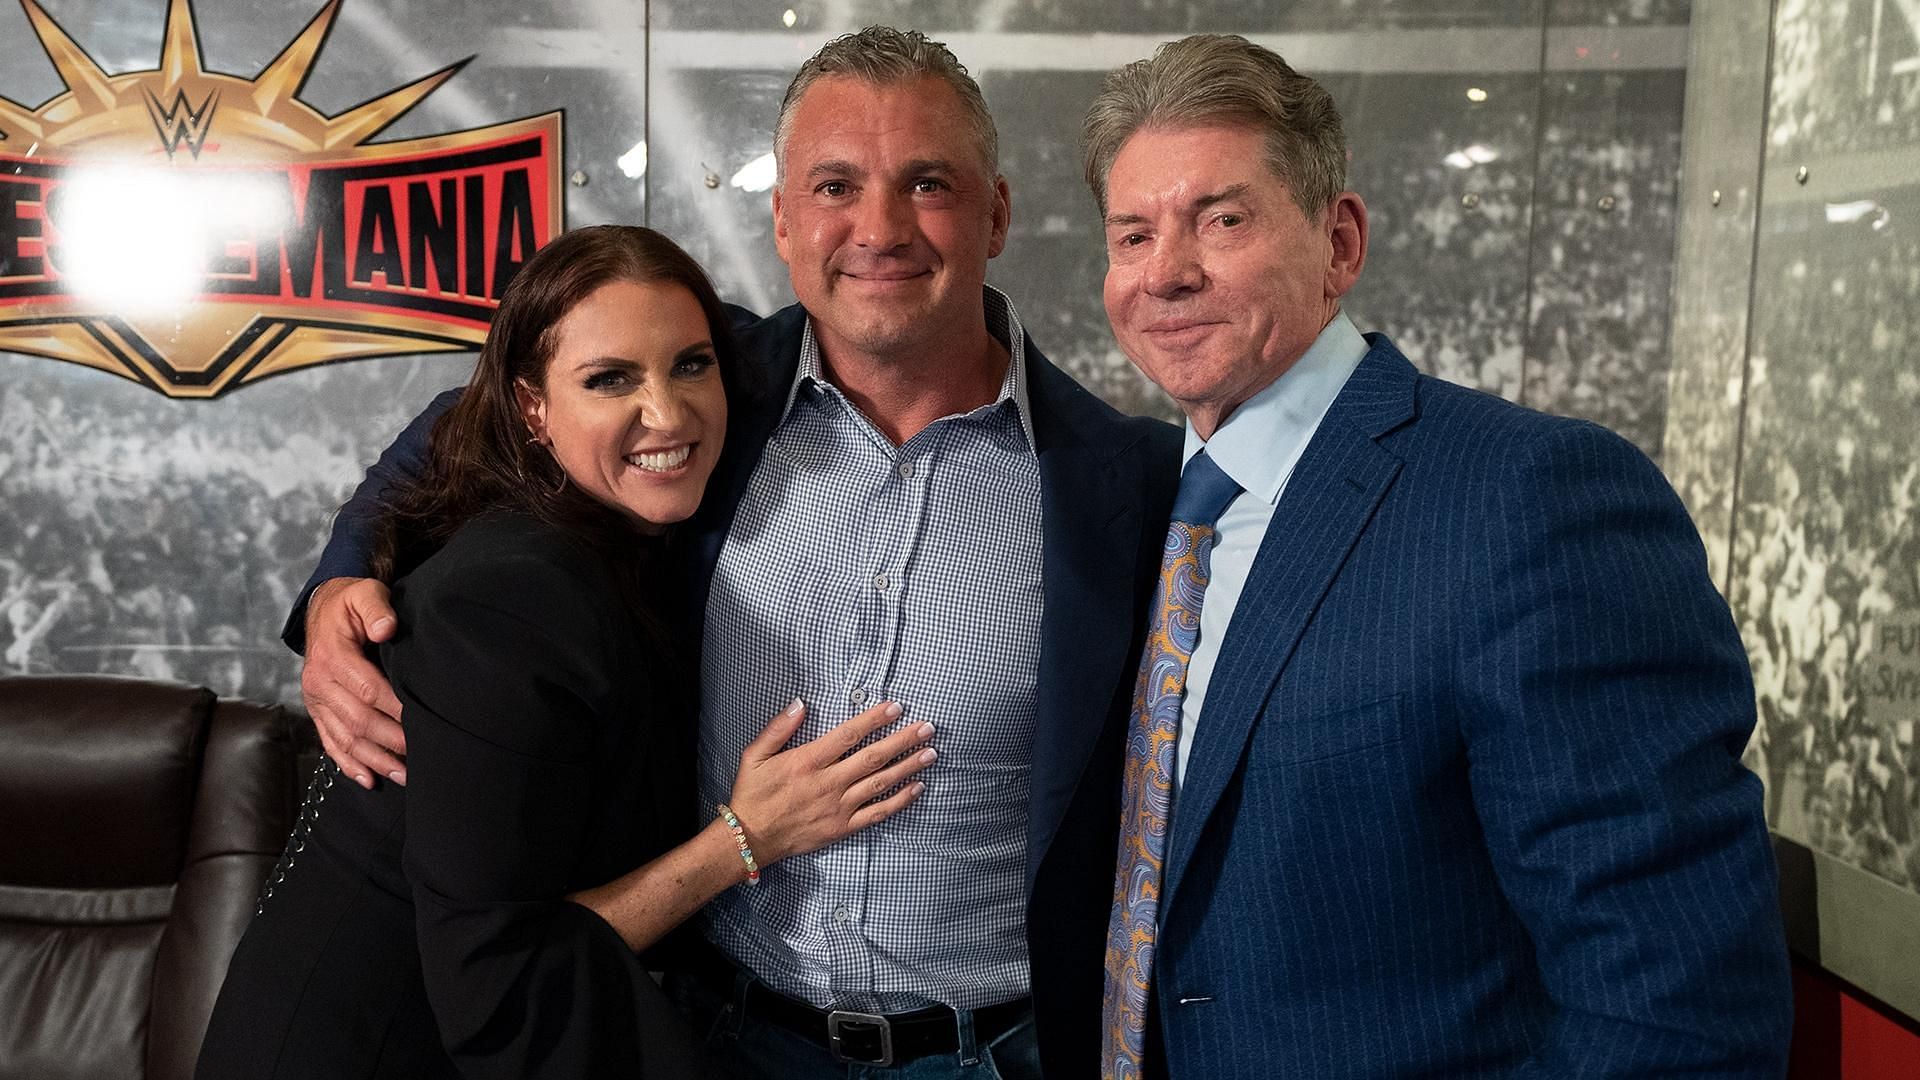 Vince McMahon has made immense contributions to the business!